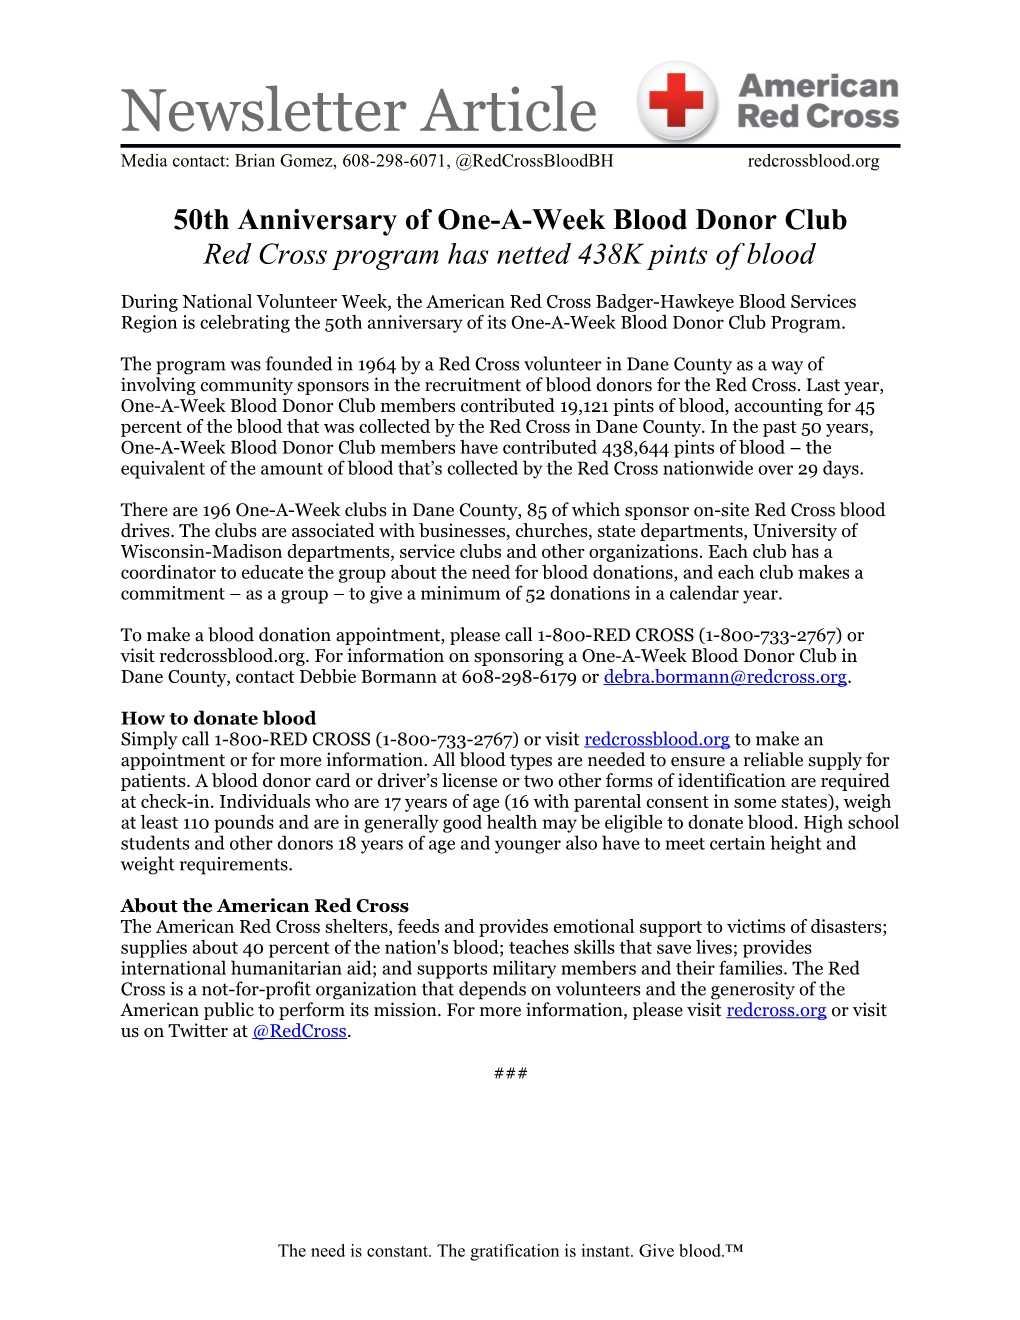 50Th Anniversary of One-A-Week Blood Donor Club